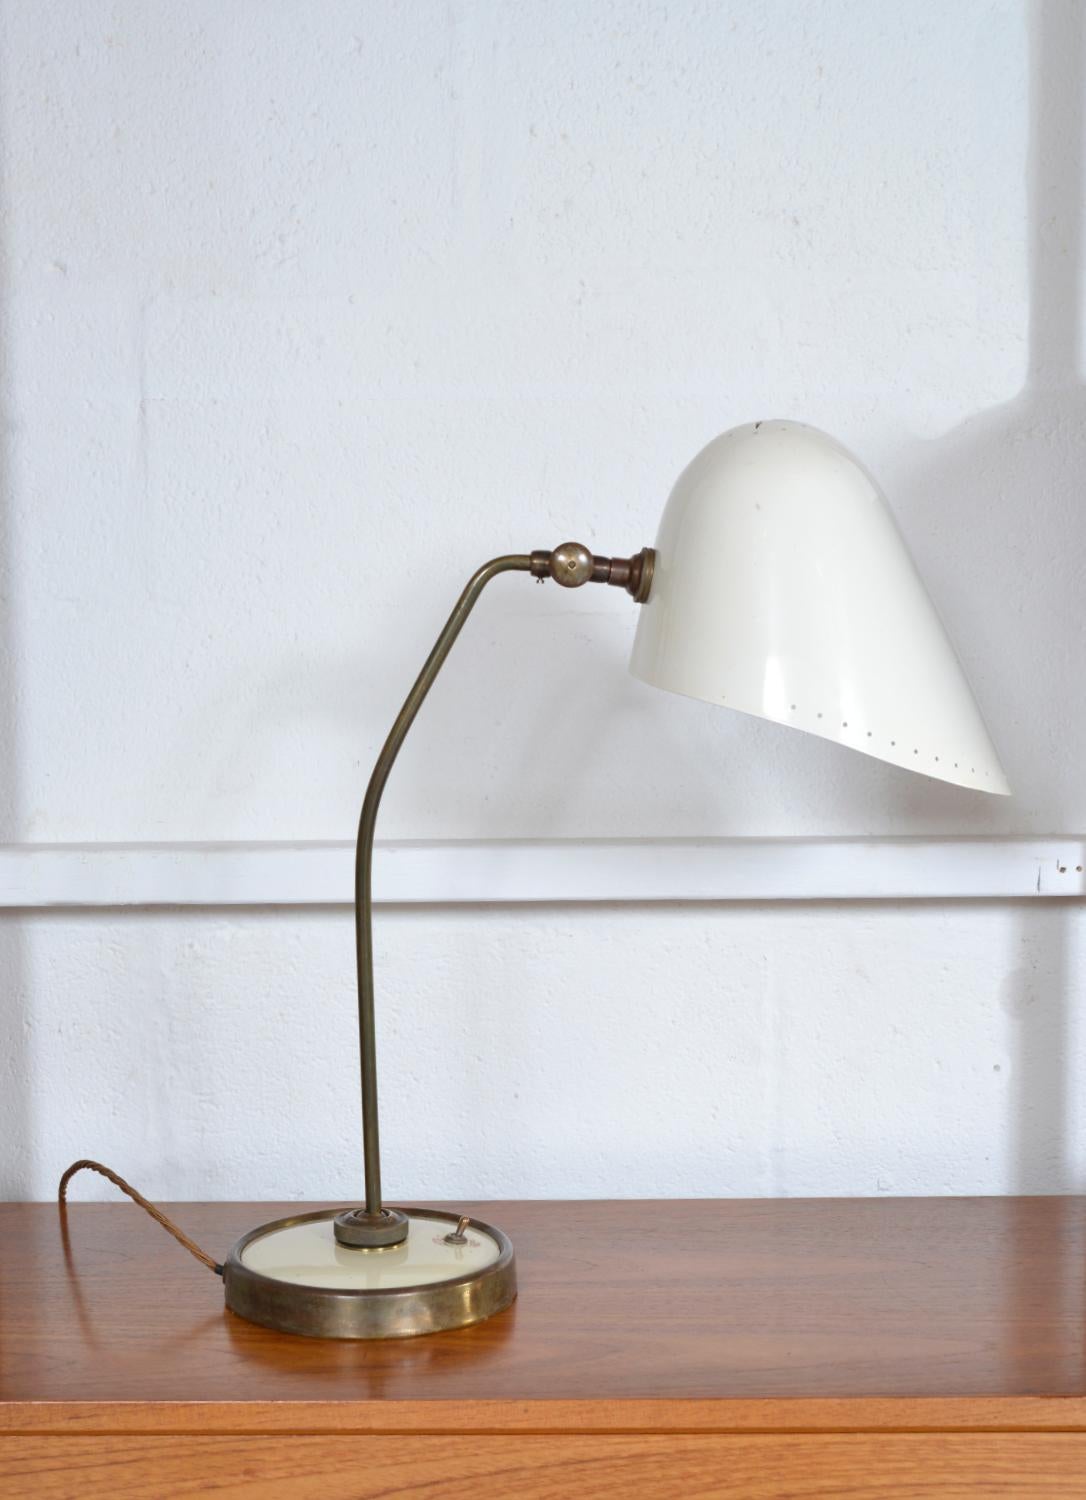 Enameled Midcentury Versalite Desk Lamp by A B Read for Troughton & Young Postwar British